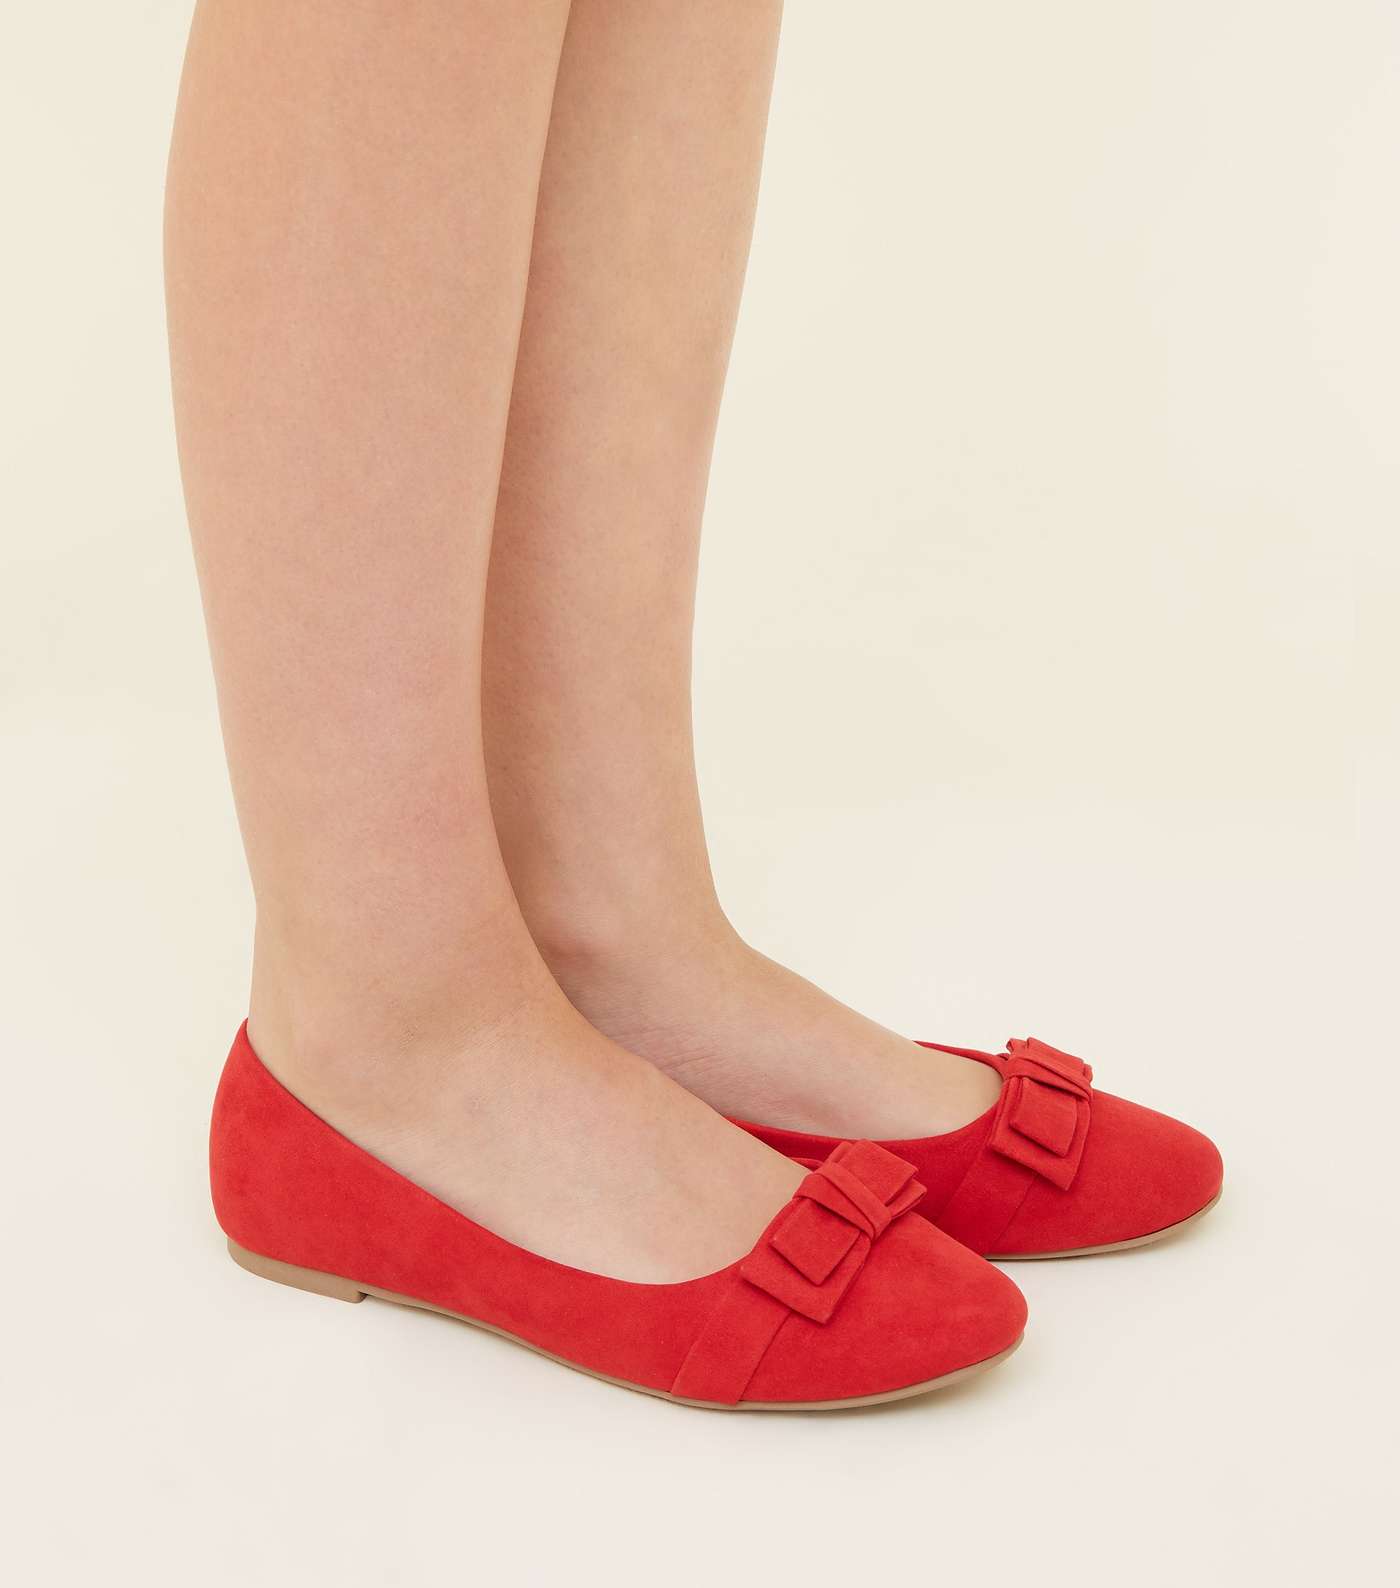 Girls Red Suedette Bow Ballet Pumps Image 2